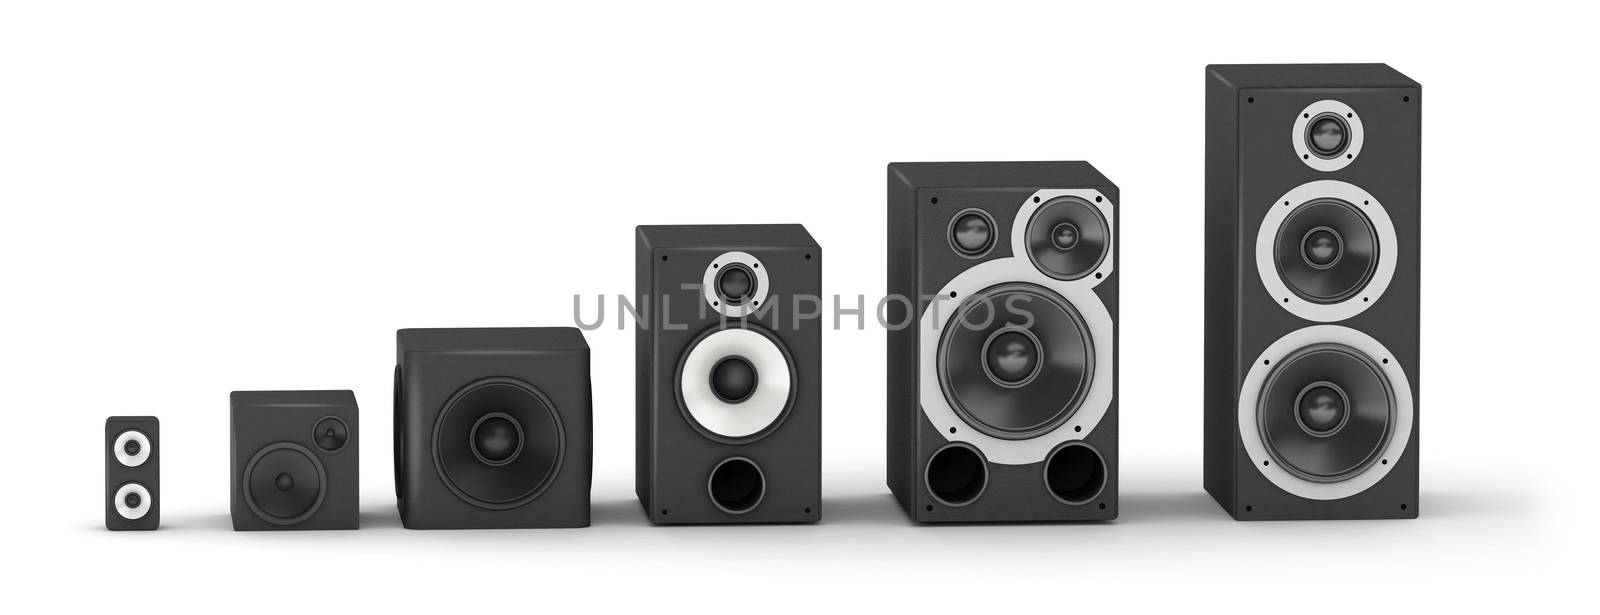 Chart from different sizes speakers hi-fi audio system on white background